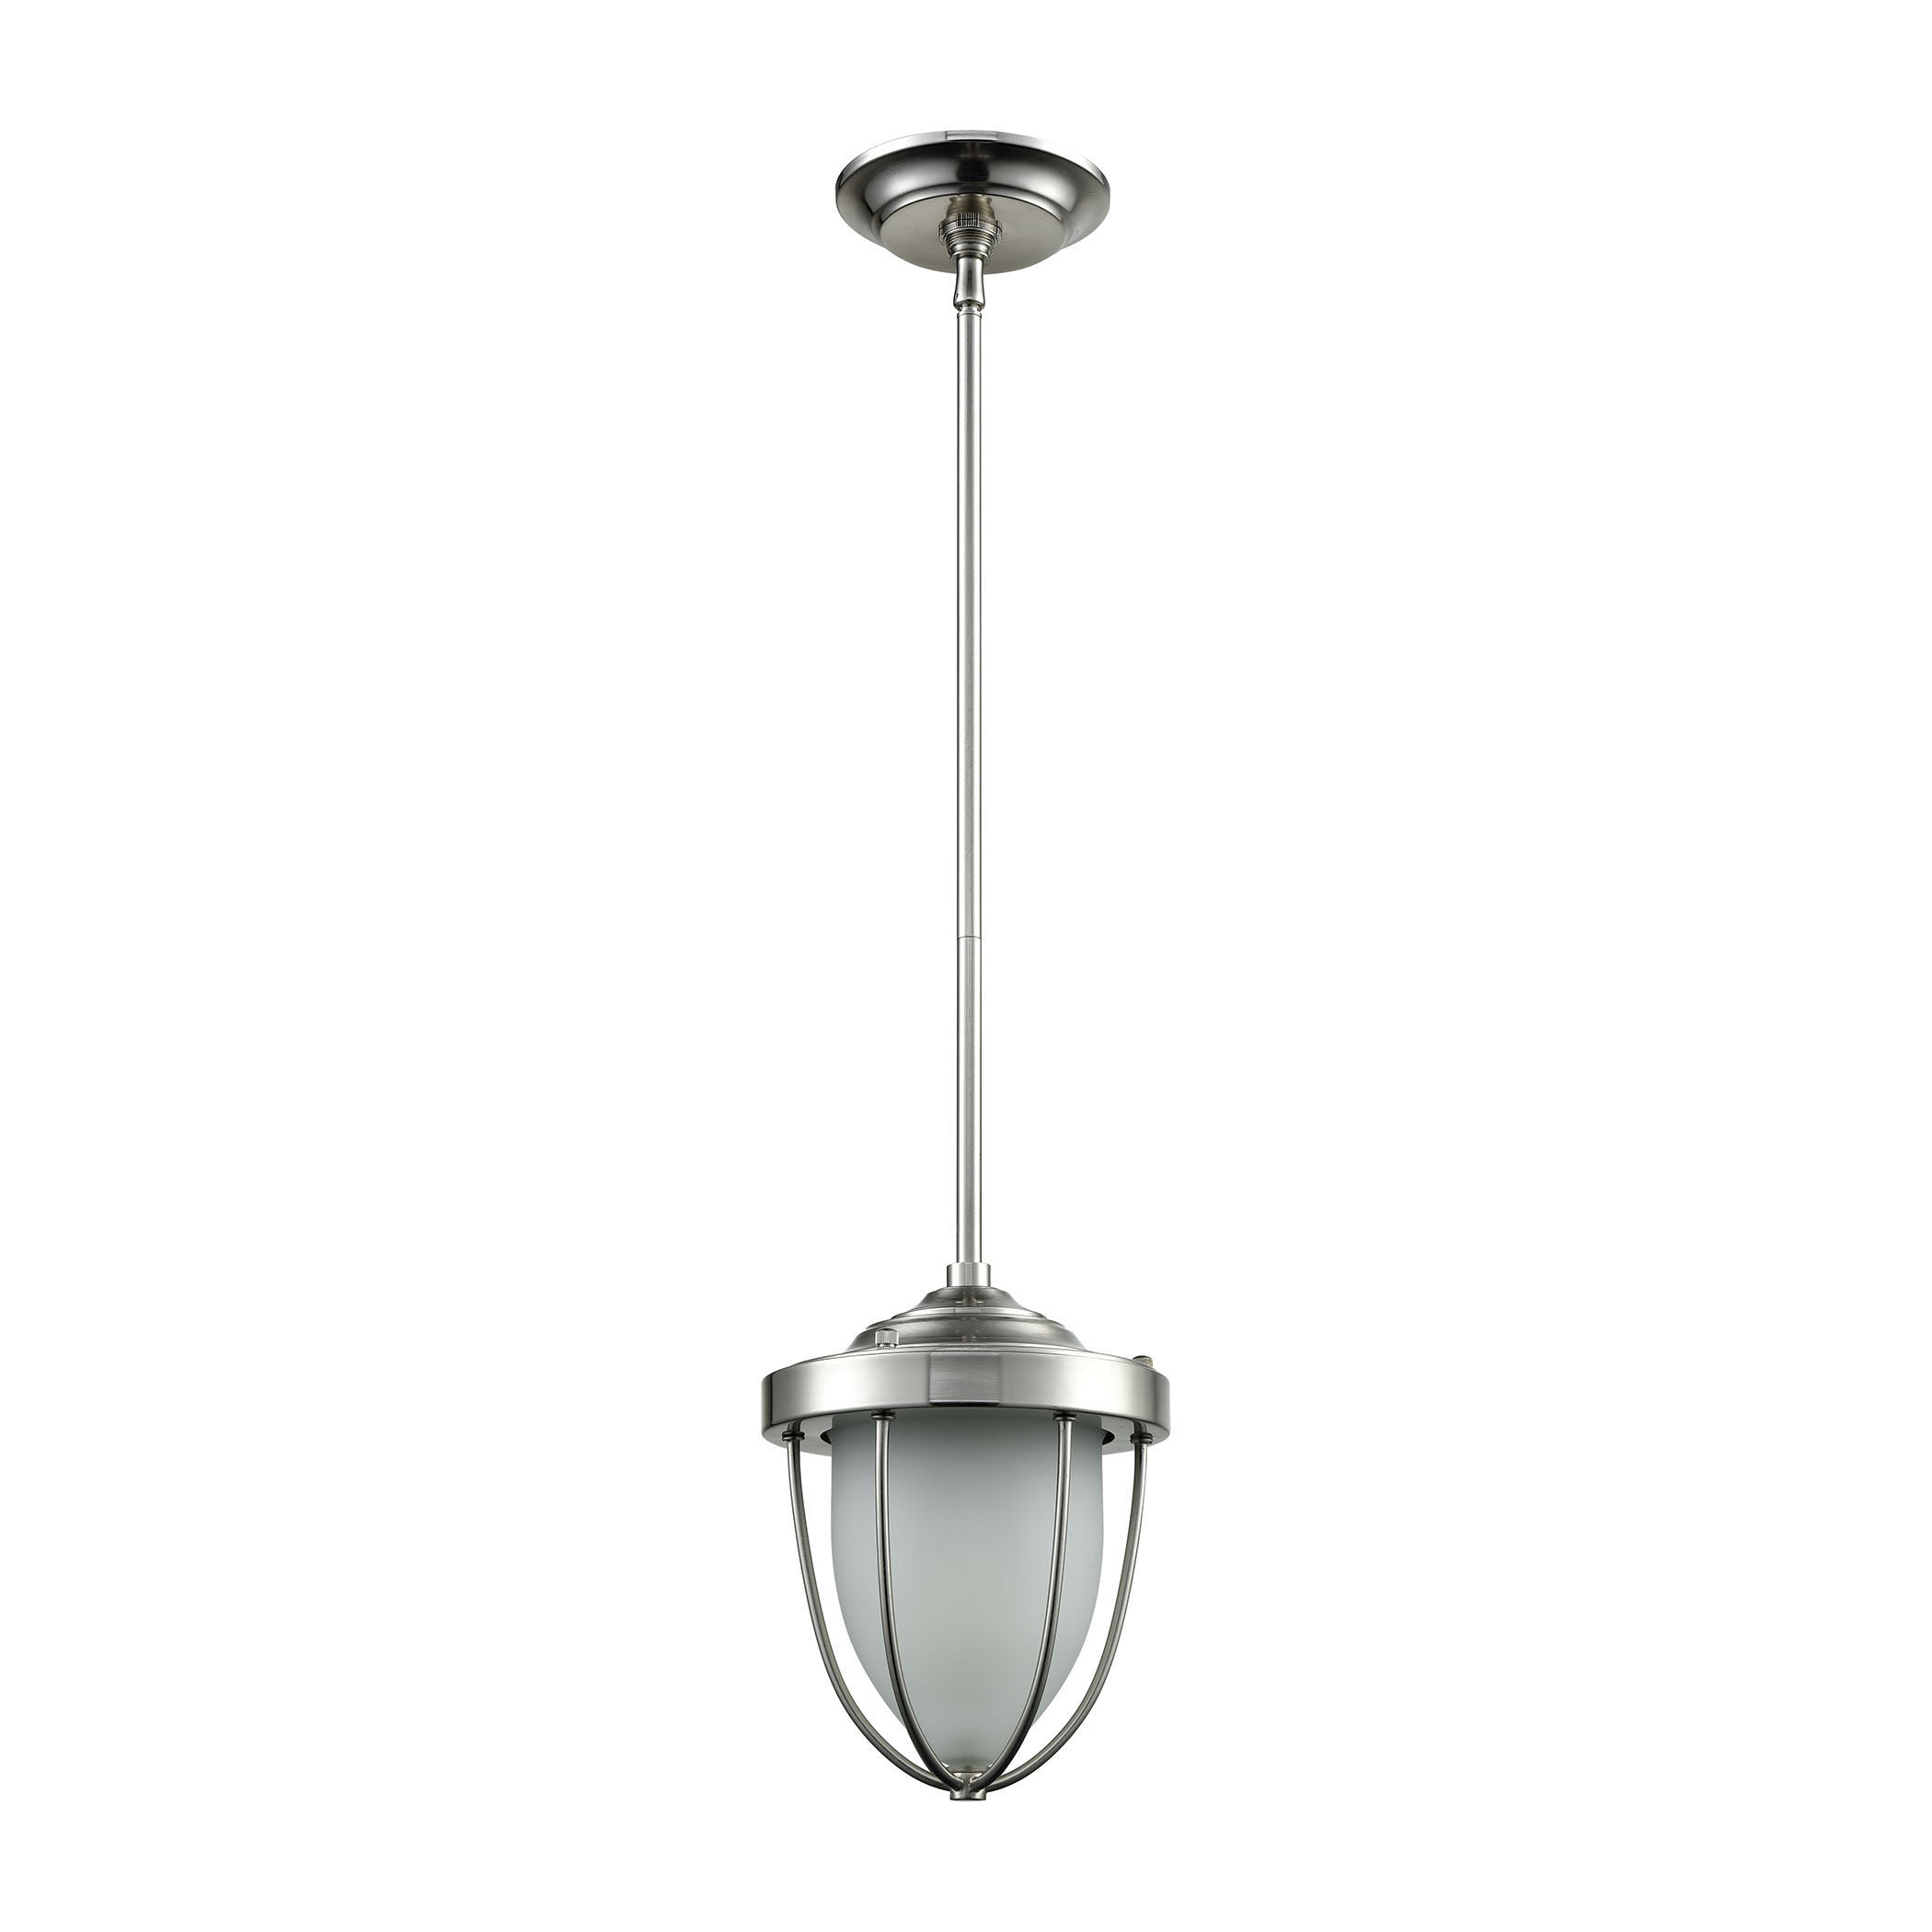 ELK Lighting 33110/1 Sturgis 1-Light Mini Pendant in Satin Nickel with Frosted Blown Glass